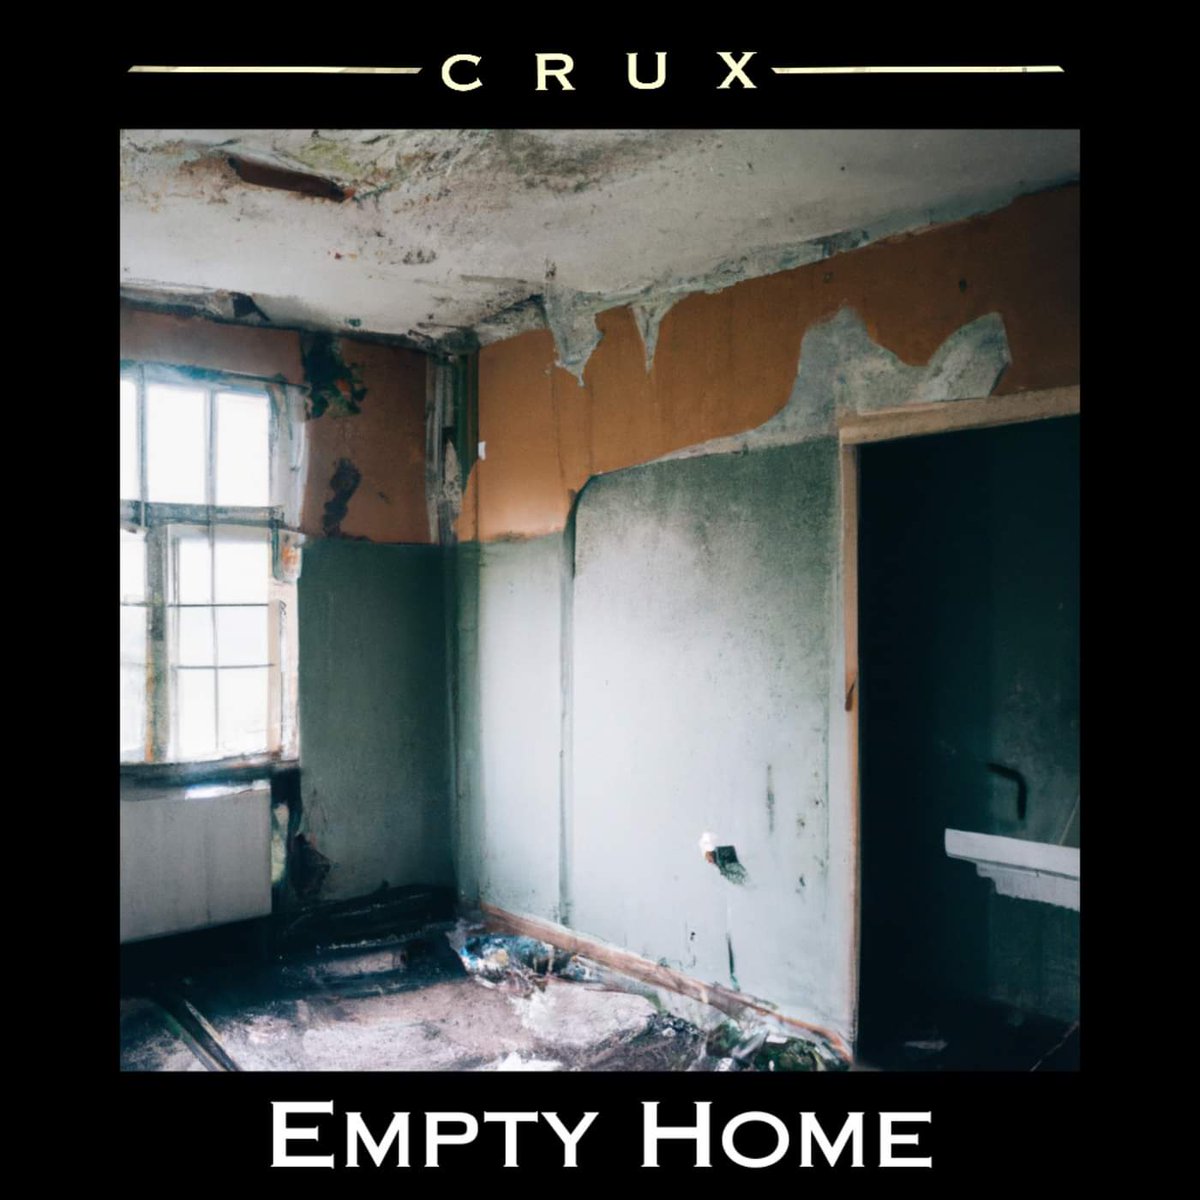 OUT 17TH AUGUST!!! @CruxNewcastle 'EMPTY HOME' #crux #cruxband #emptyhome #newsingle #newsinglealert #newsinglerelease #newsingle2023 #newmusic #newmusicalert #newmusic2023 #newmusicrelease #indie #indierock #band #musicians